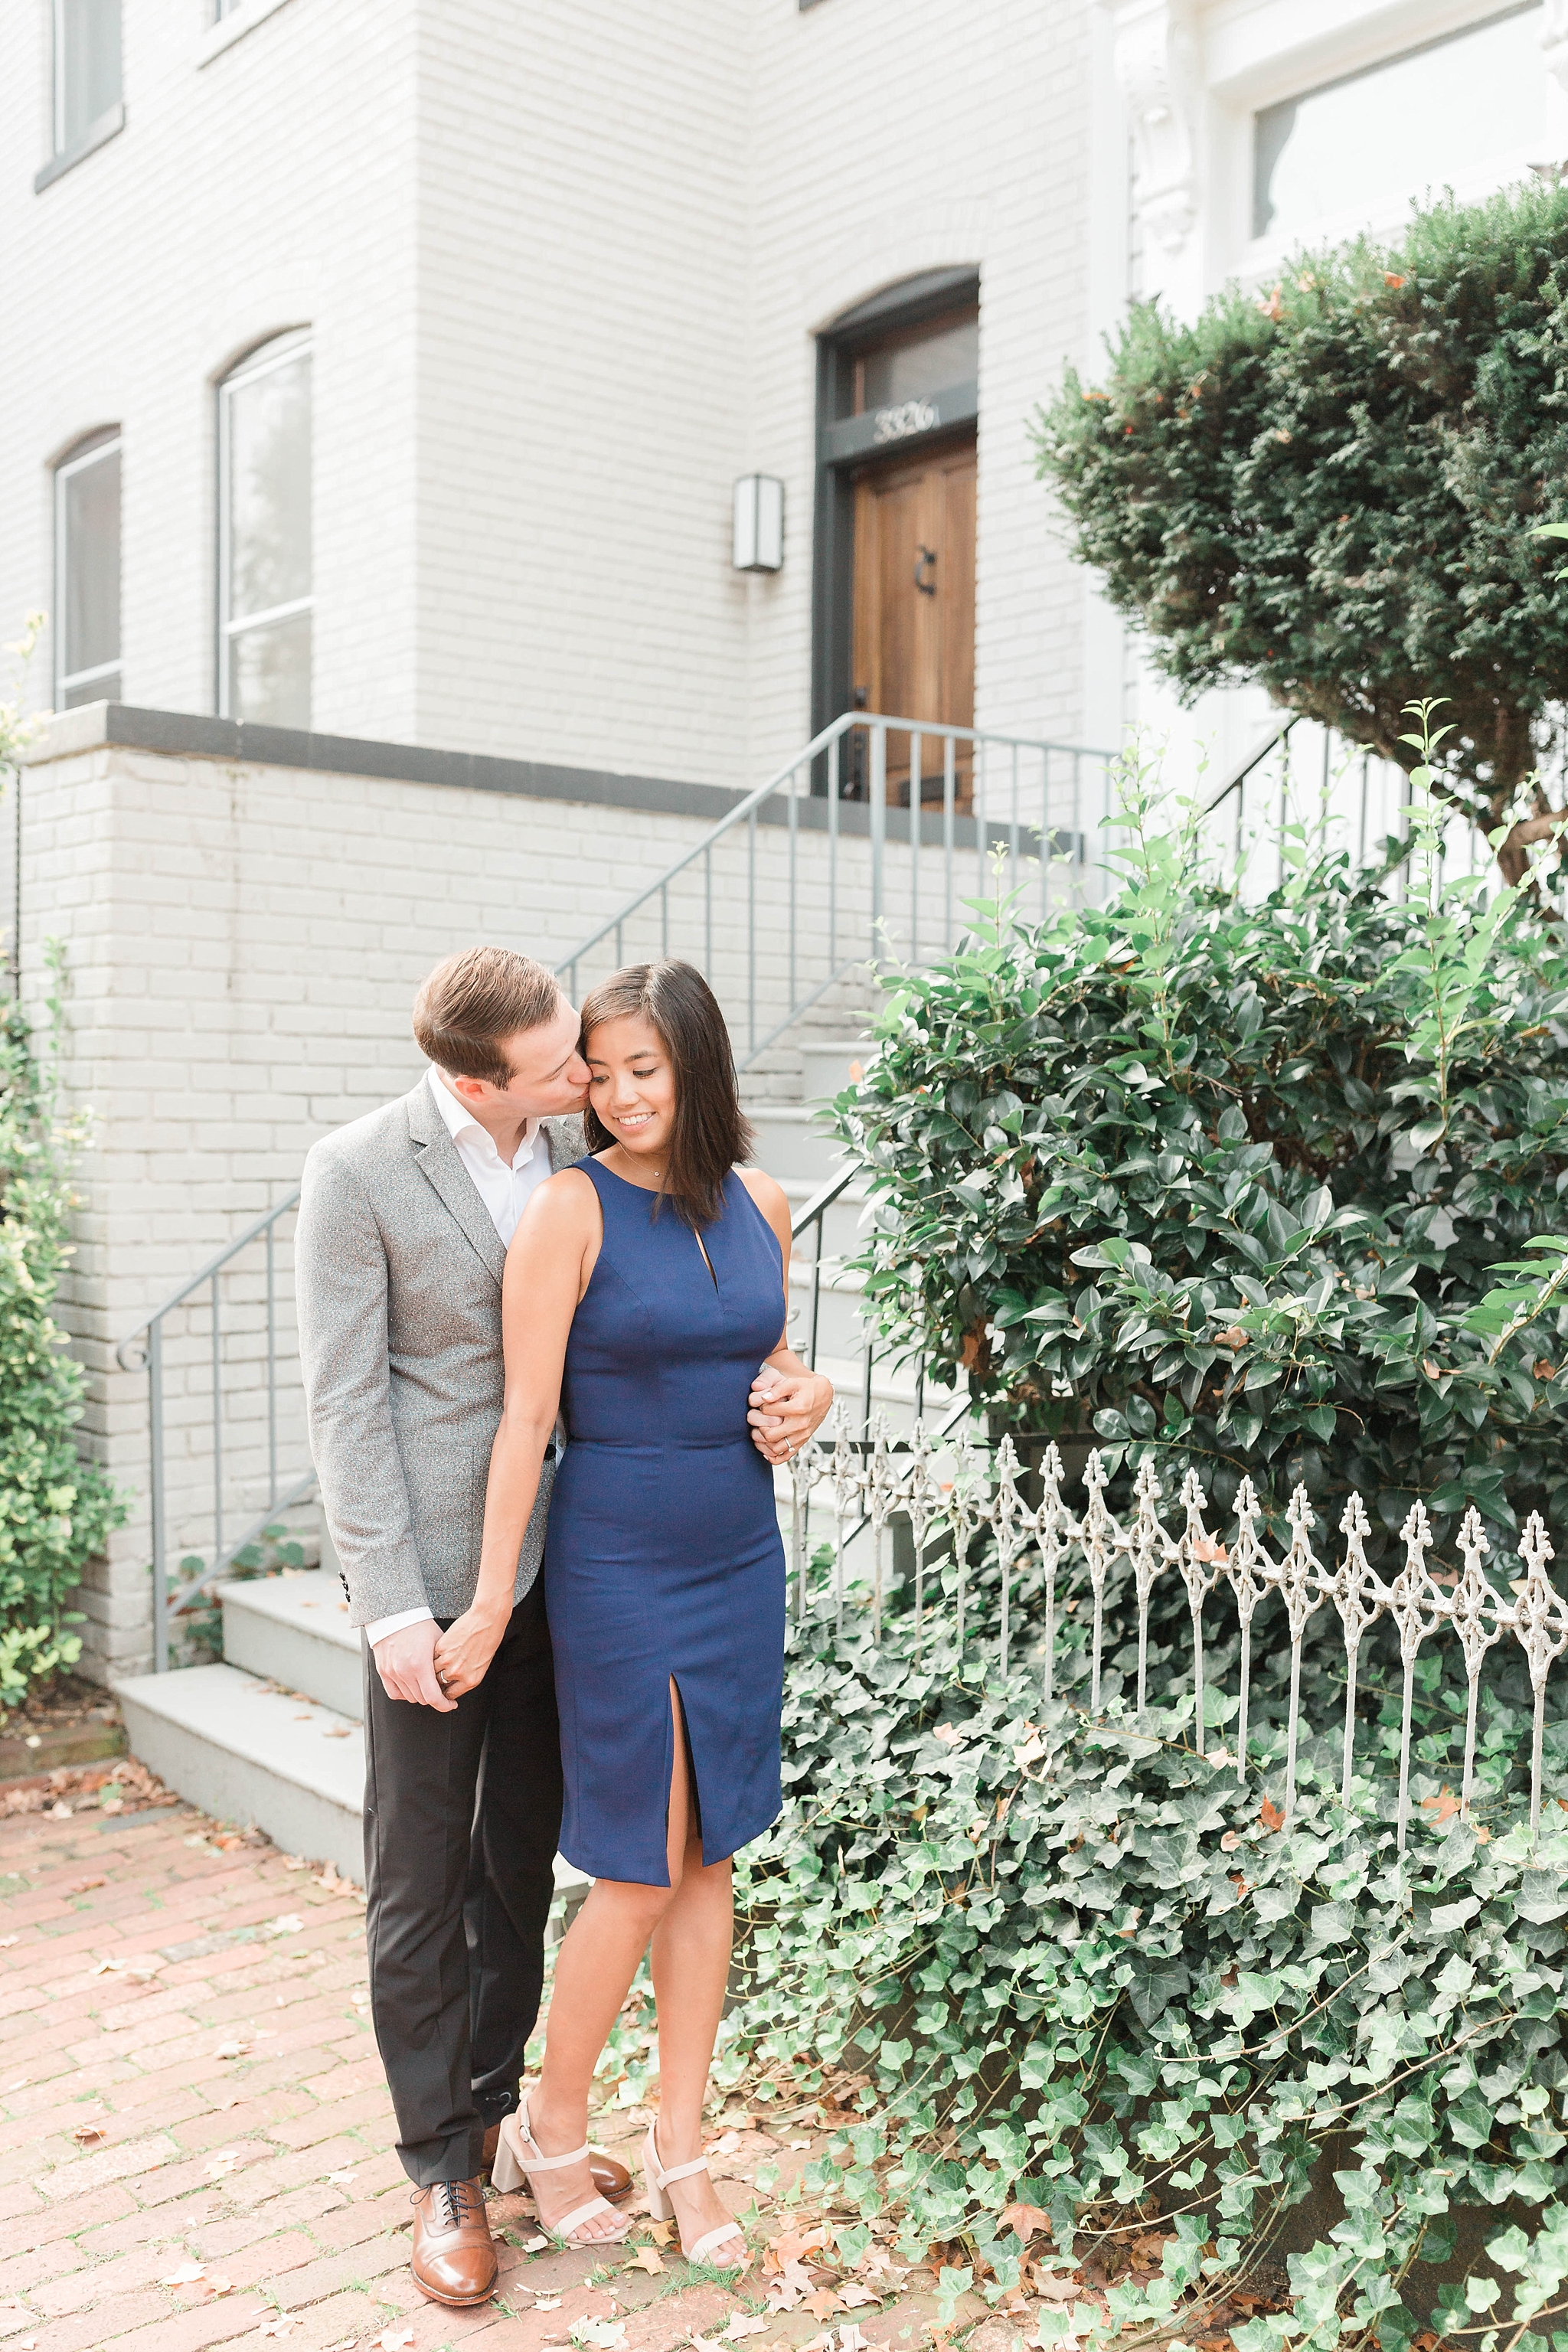 A romantic sunrise engagement session in the Georgetown area of Washington, DC features the stylish couple's Vespa. 